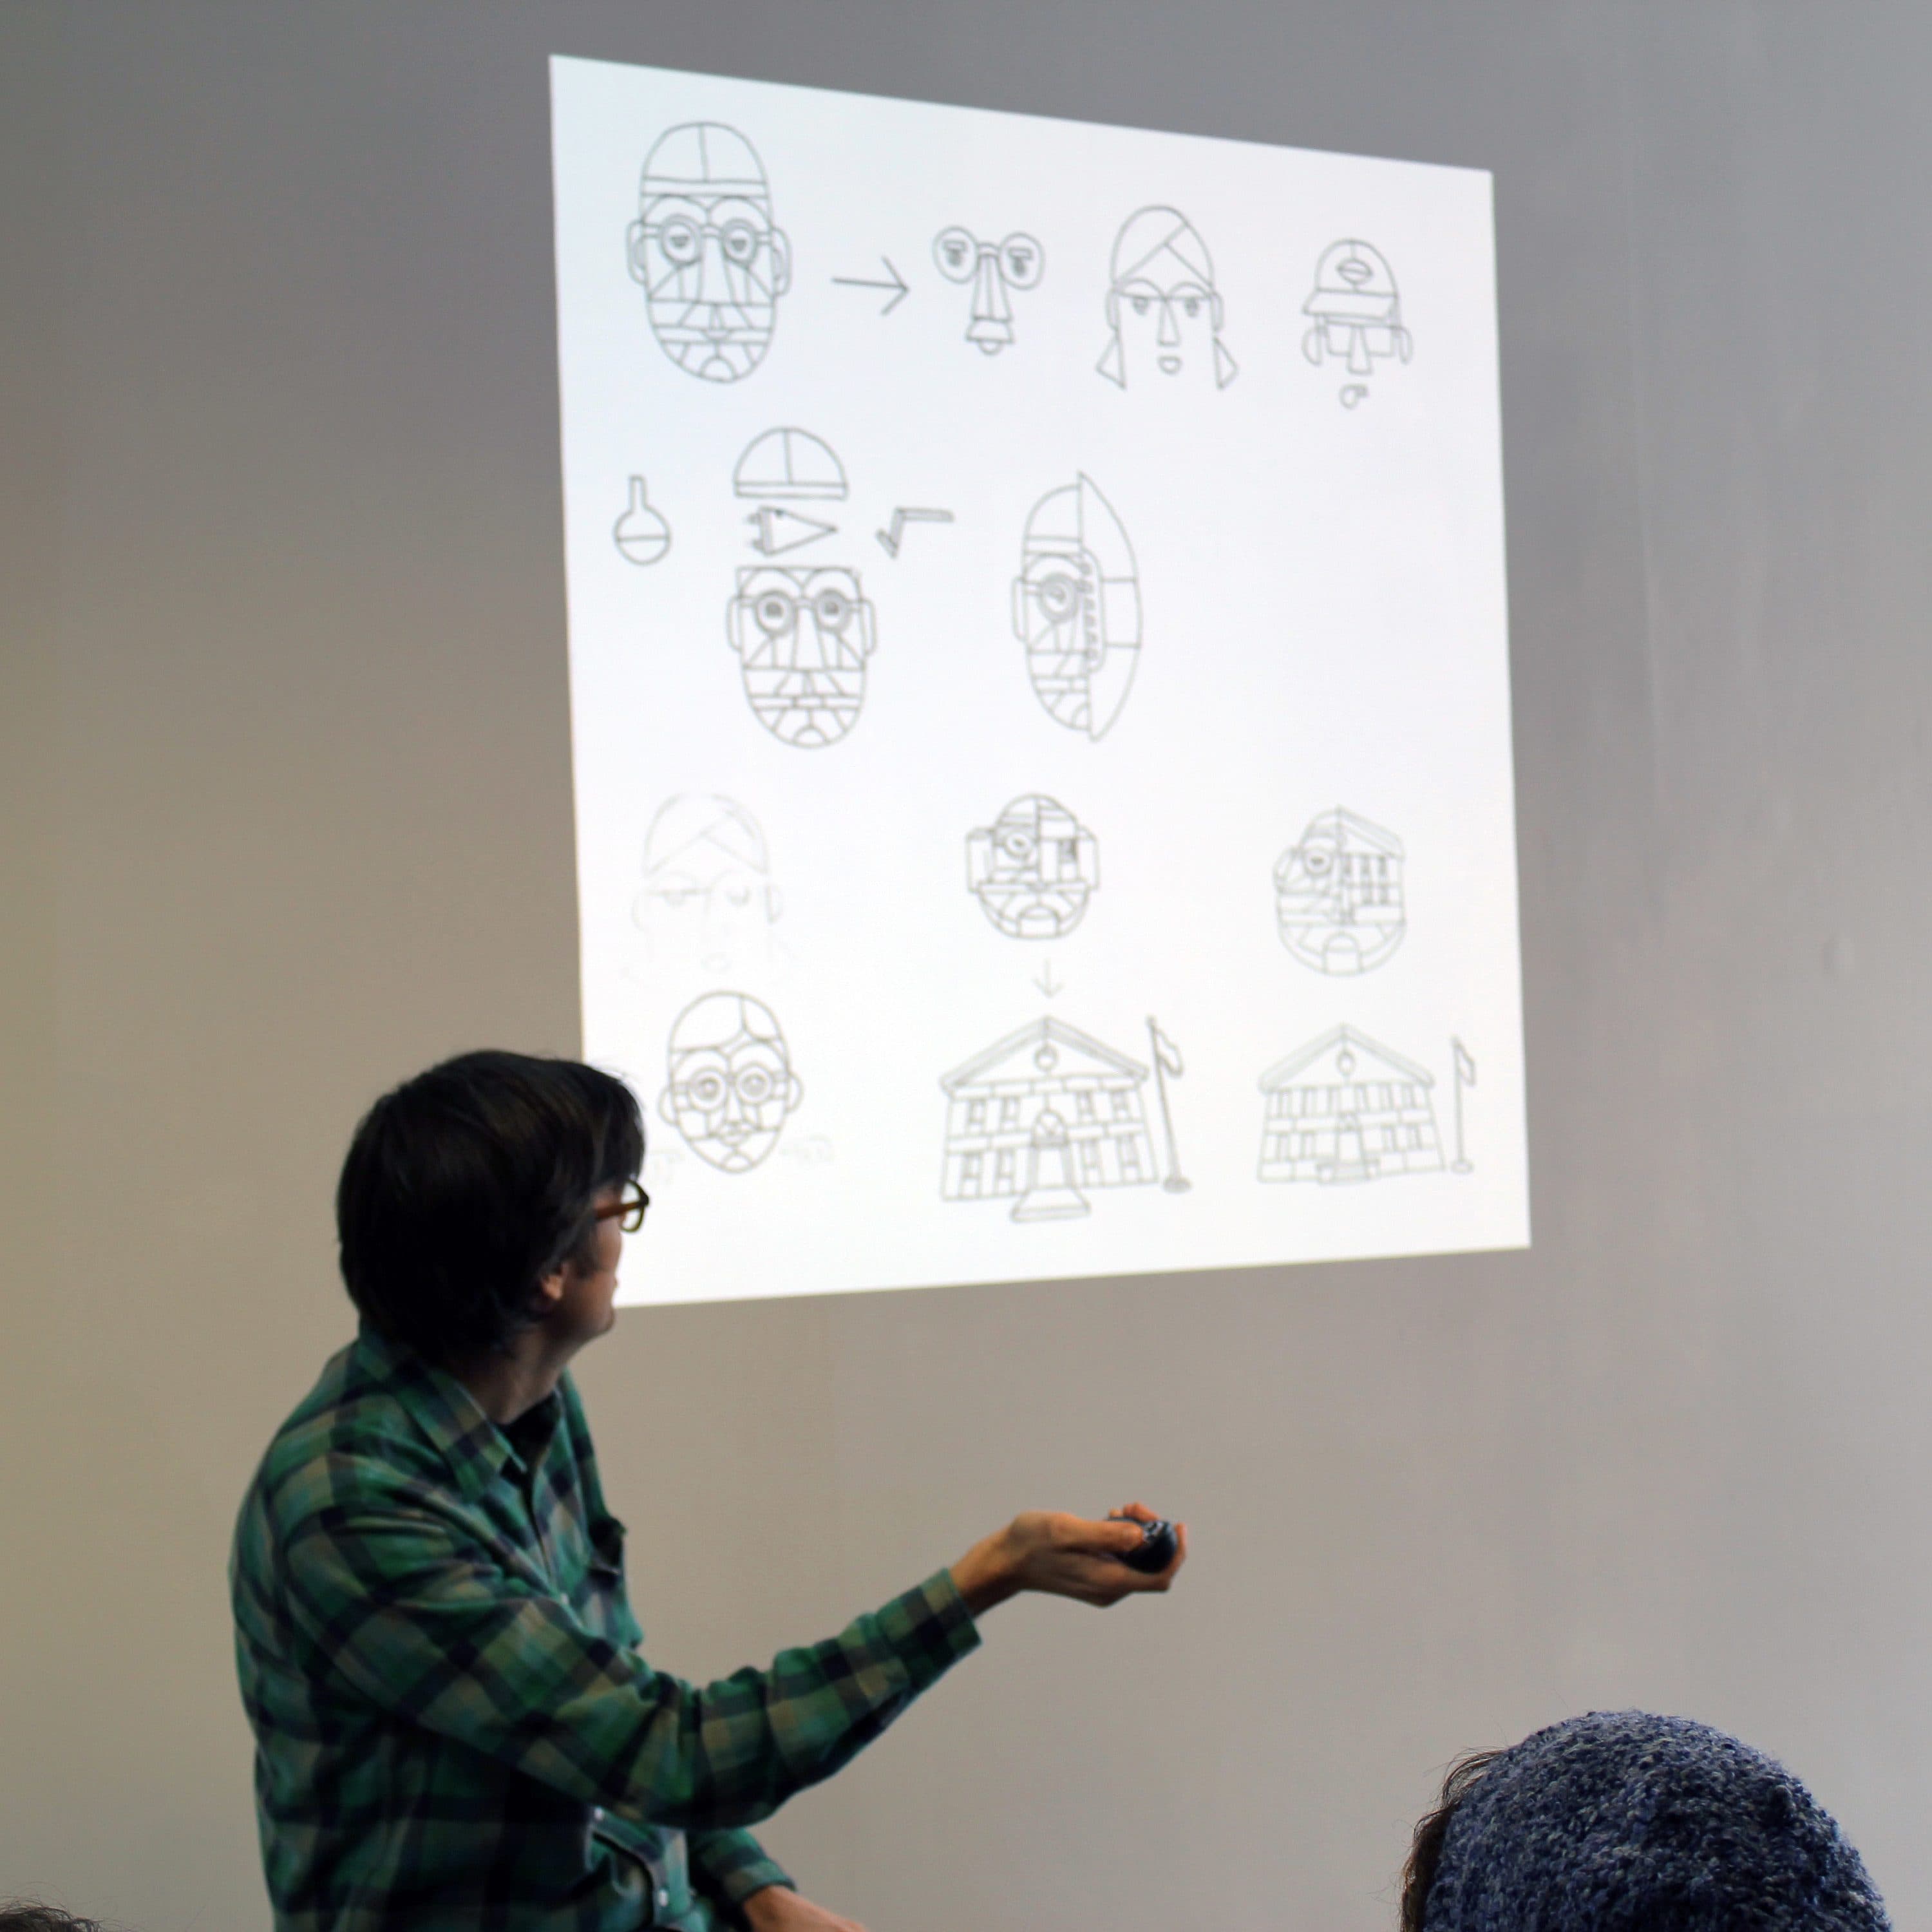 A person in a green plaid shirt is giving a presentation. They point towards a projection on the wall which displays a series of sketches showing the progression of design elements for a character or object. The audience faces the presenter.